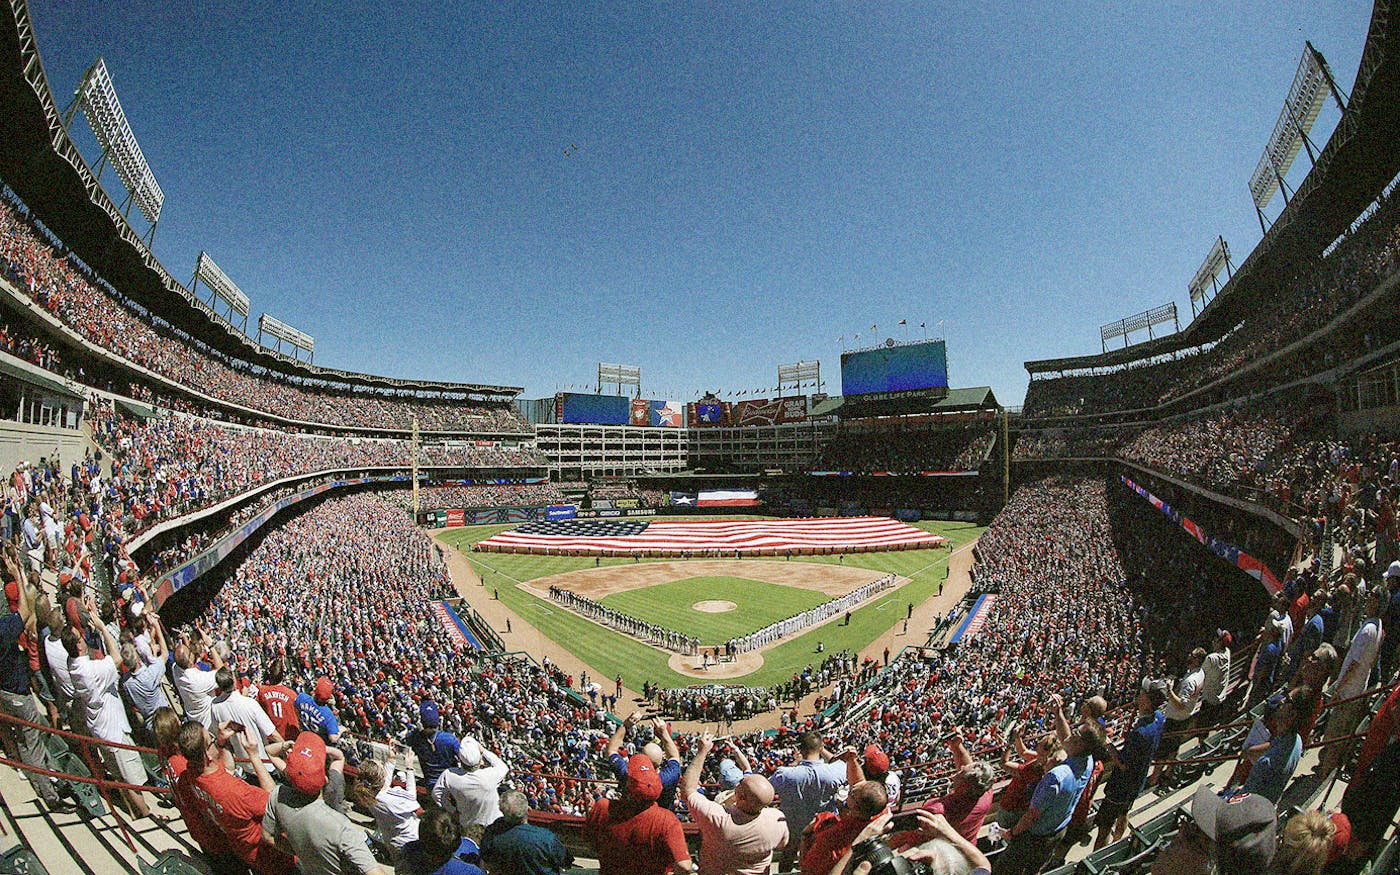 Globe Life Field sits empty, but Arlington and the Rangers are on